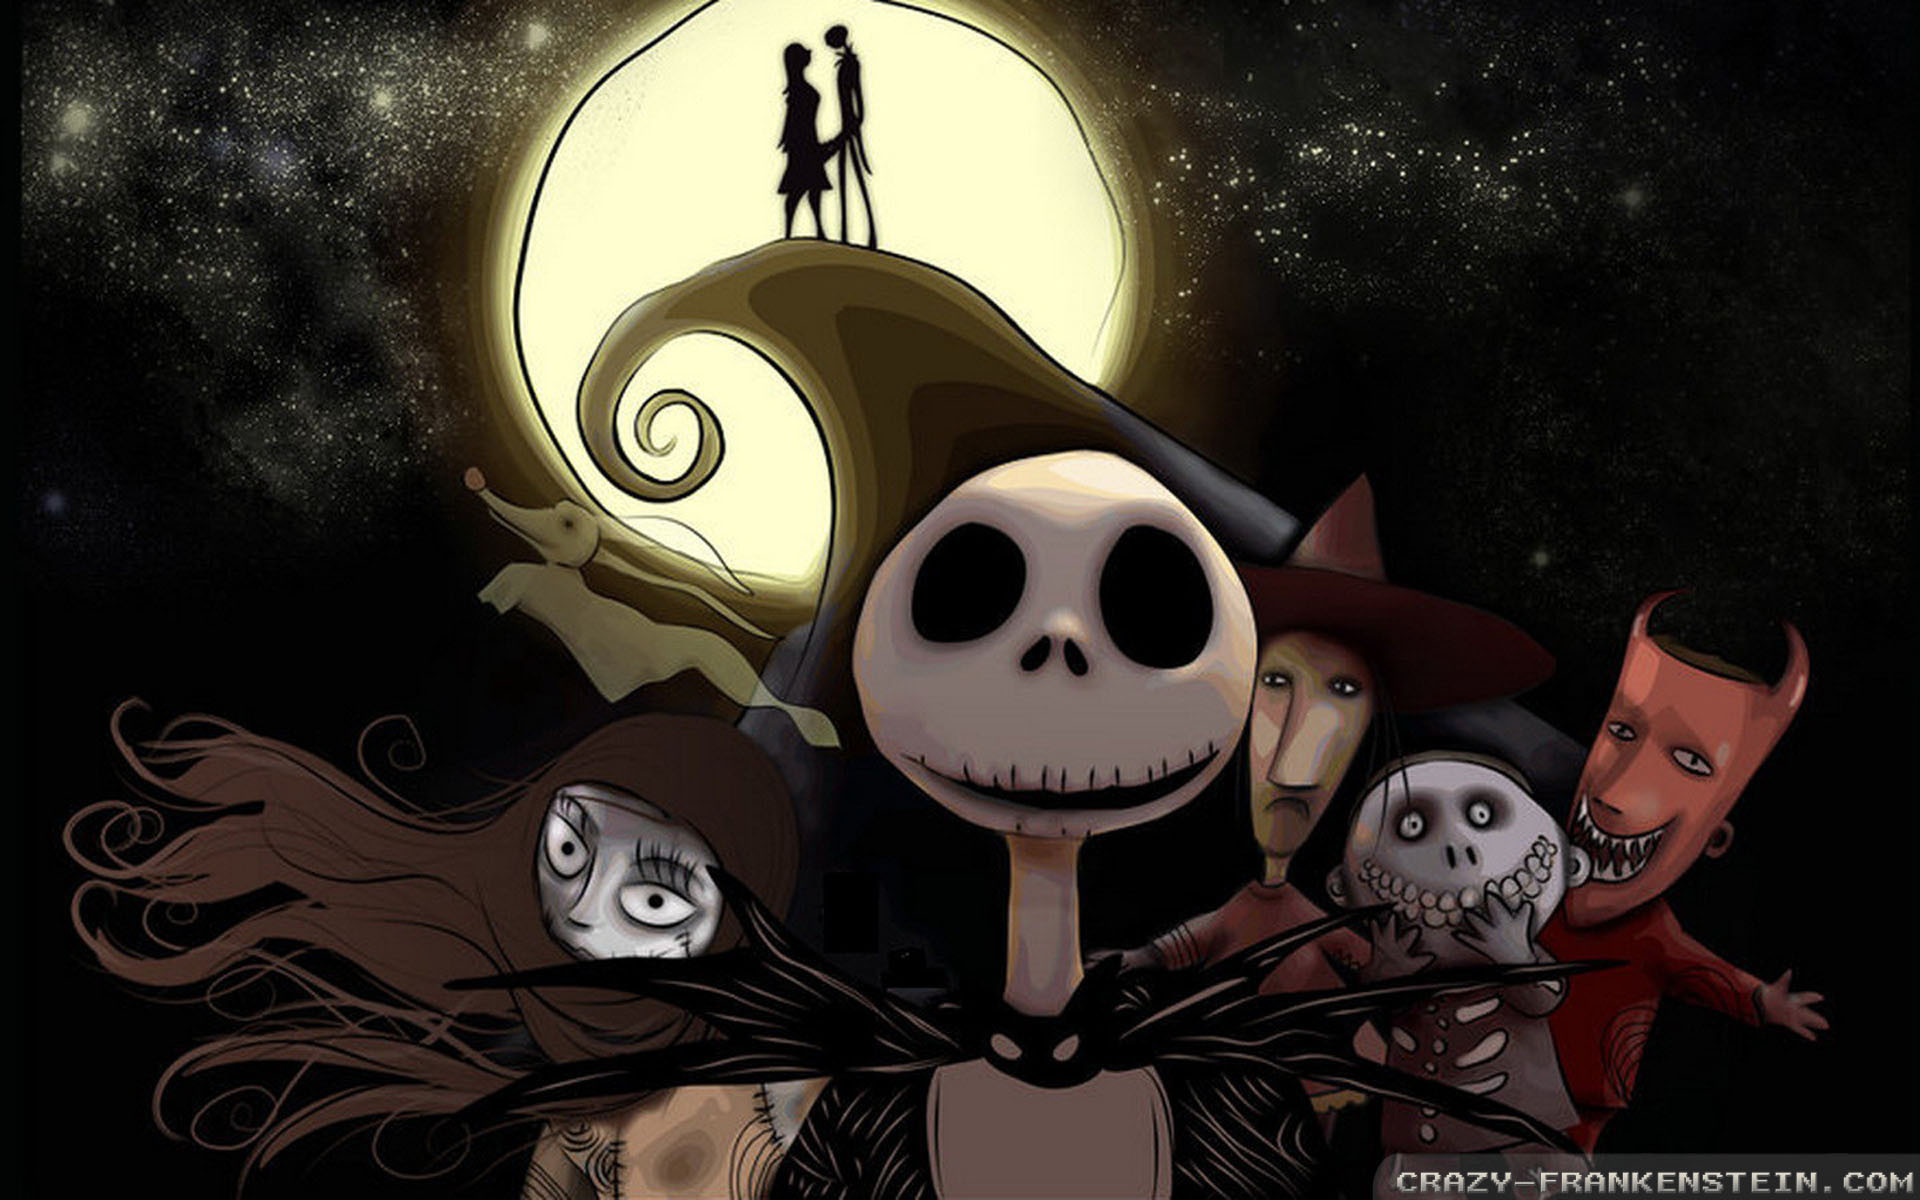 1920x1200 Wallpaper: Nightmare before Christmas wallpapers 4. Resolution: 1024x768 |  1280x1024 | 1600x1200. Widescreen Res: 1440x900 | 1680x1050 | 